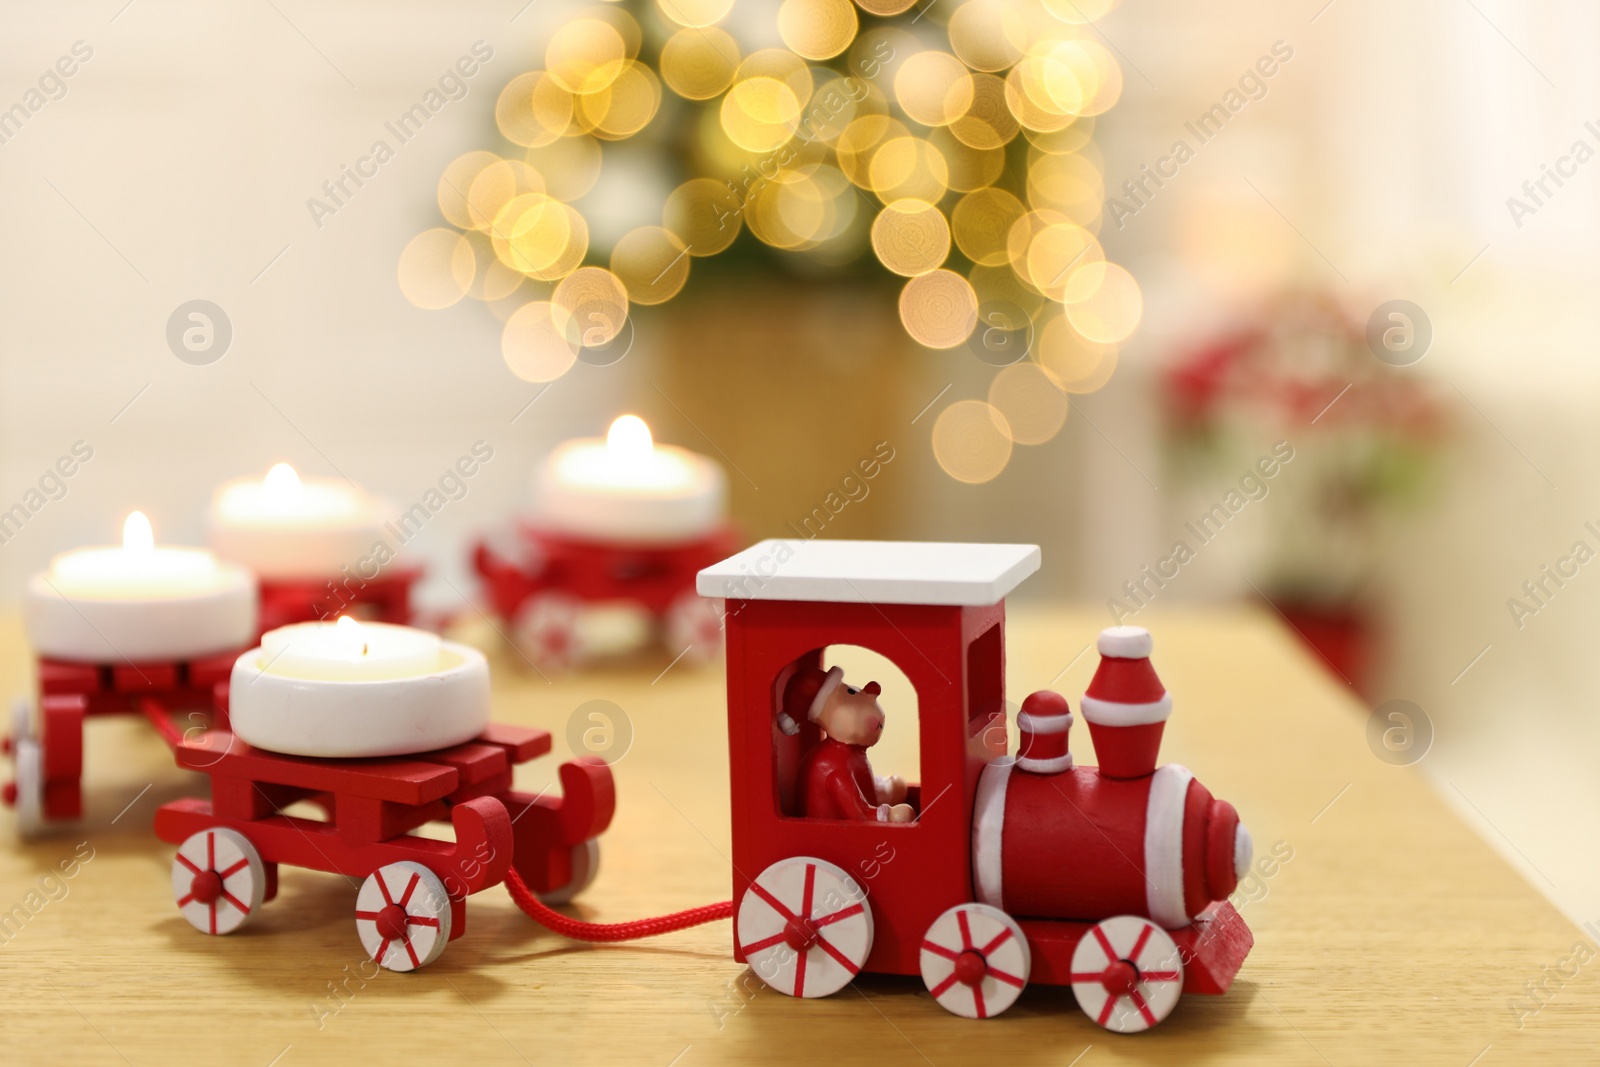 Photo of Red toy train as Christmas candle holder on wooden table in room, closeup